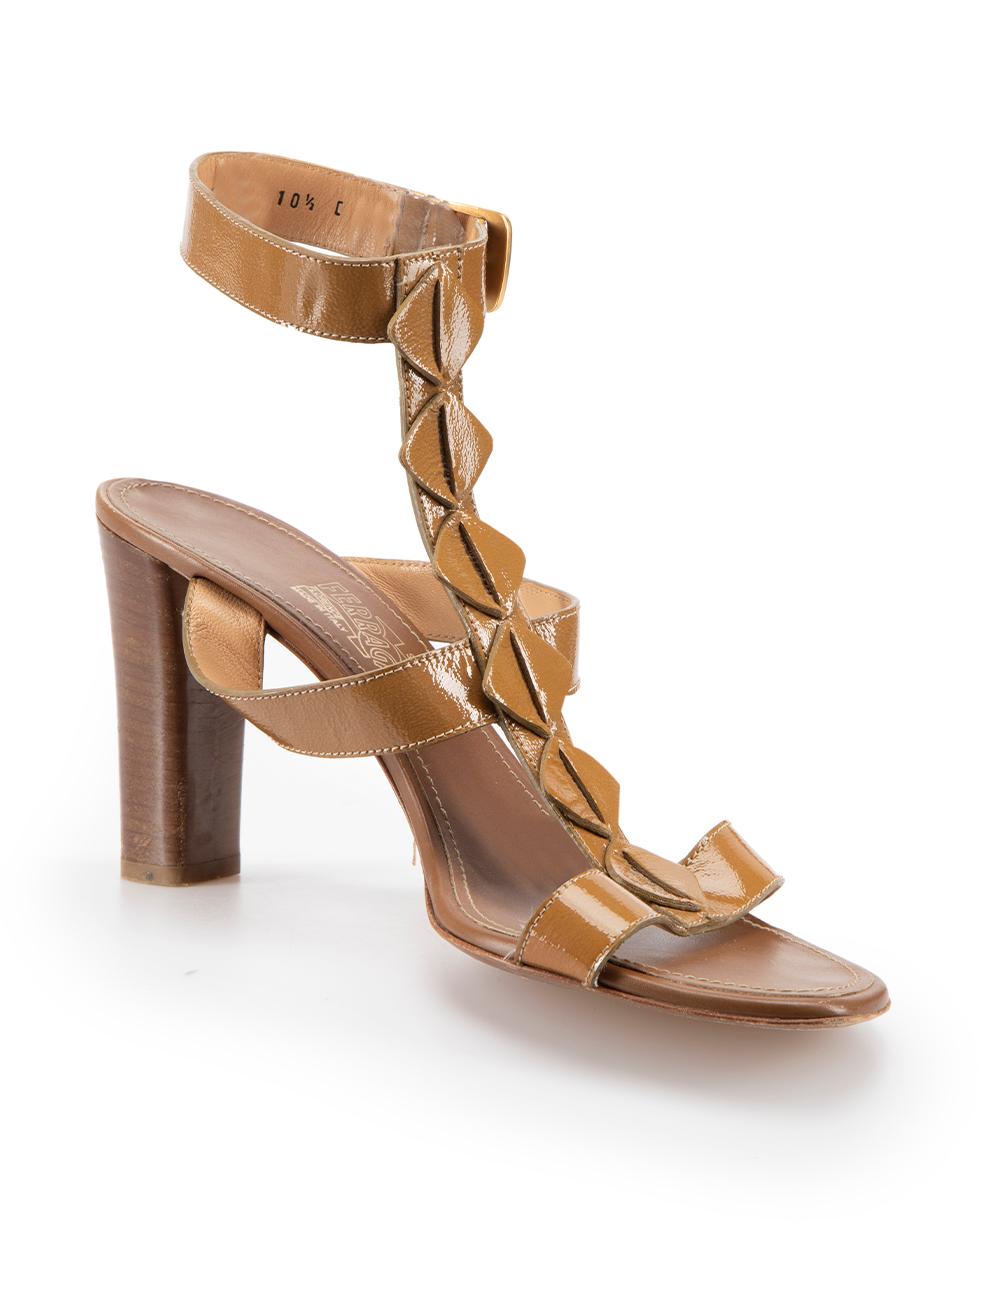 CONDITION is Very good. Minimal wear to shoes is evident. Minimal wear to both heels with indents and scratches on this used Salvatore Ferragamo designer resale item.



Details


Brown

Patent leather

Heeled sandals

Open-toe

Adjustable ankle